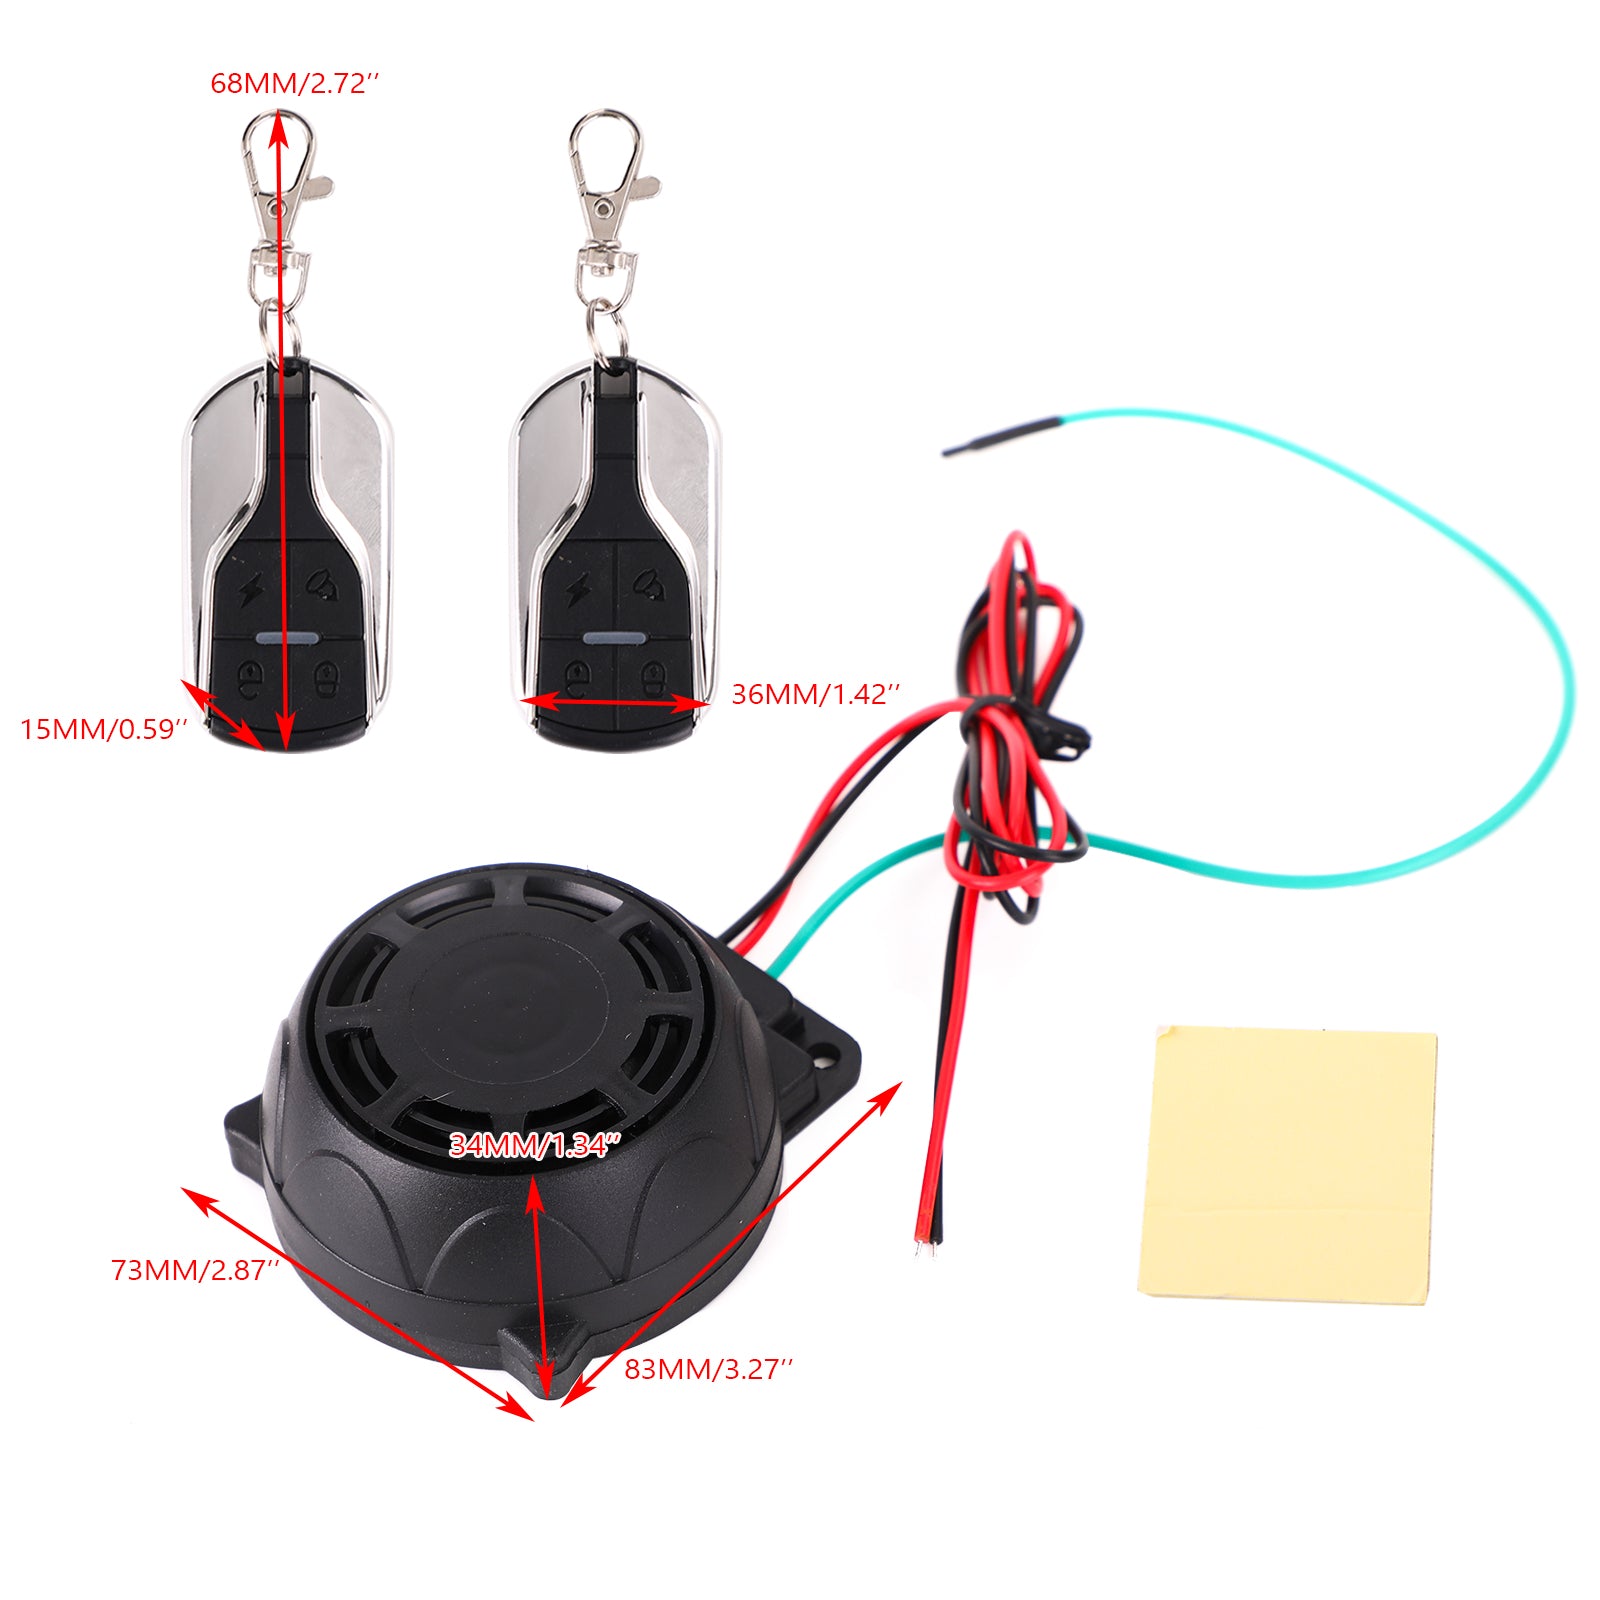 12V Anti Theft Security Rc Alarm System Vibration Detector For Motorcycle Generic